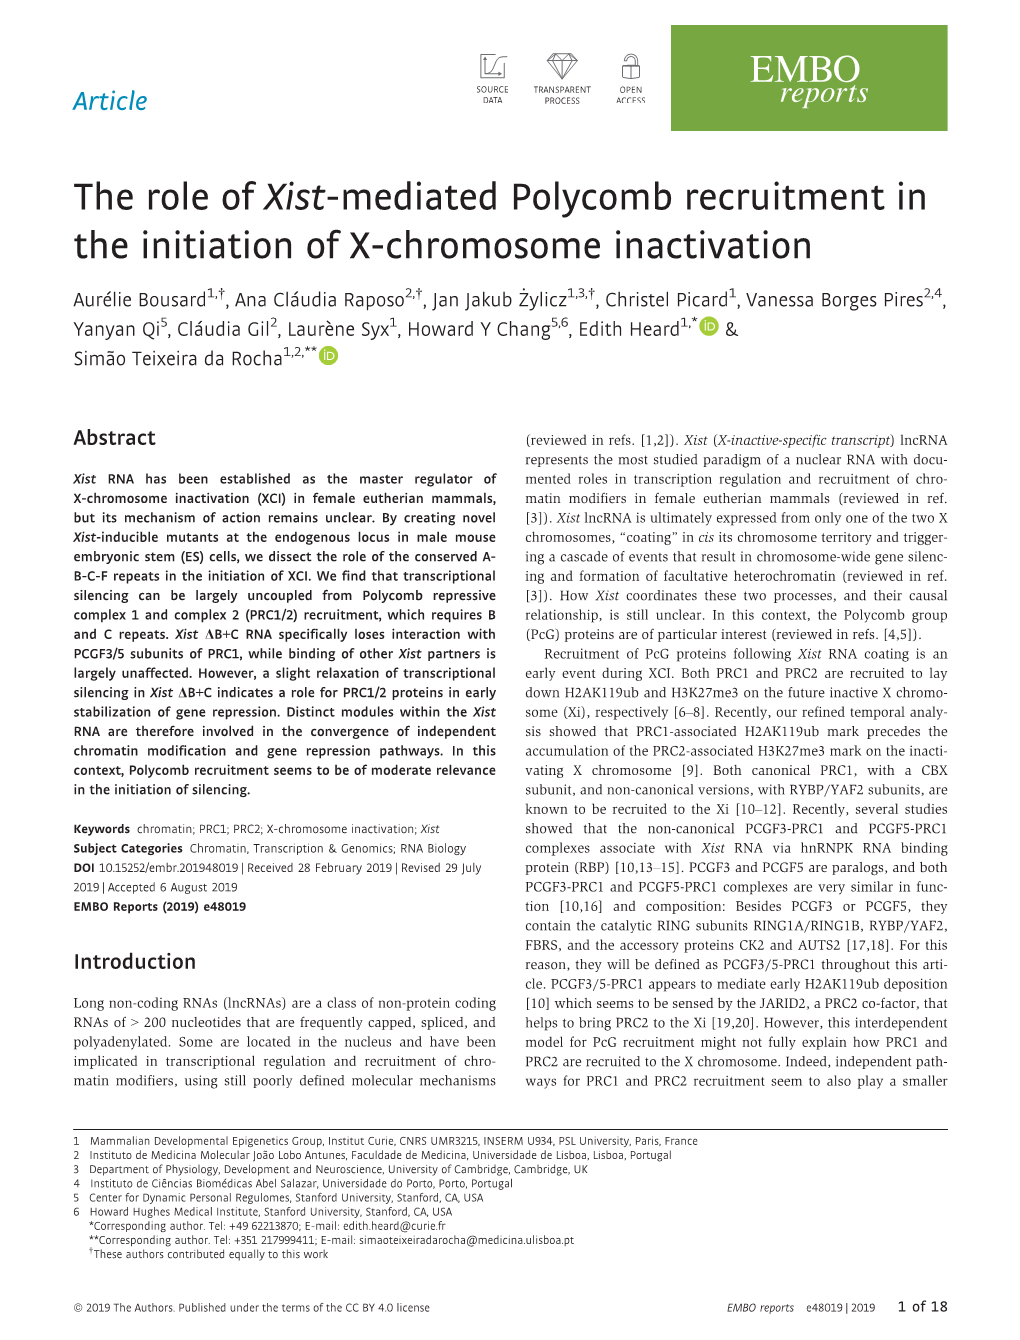 The Role of Xist‐Mediated Polycomb Recruitment in the Initiation of X